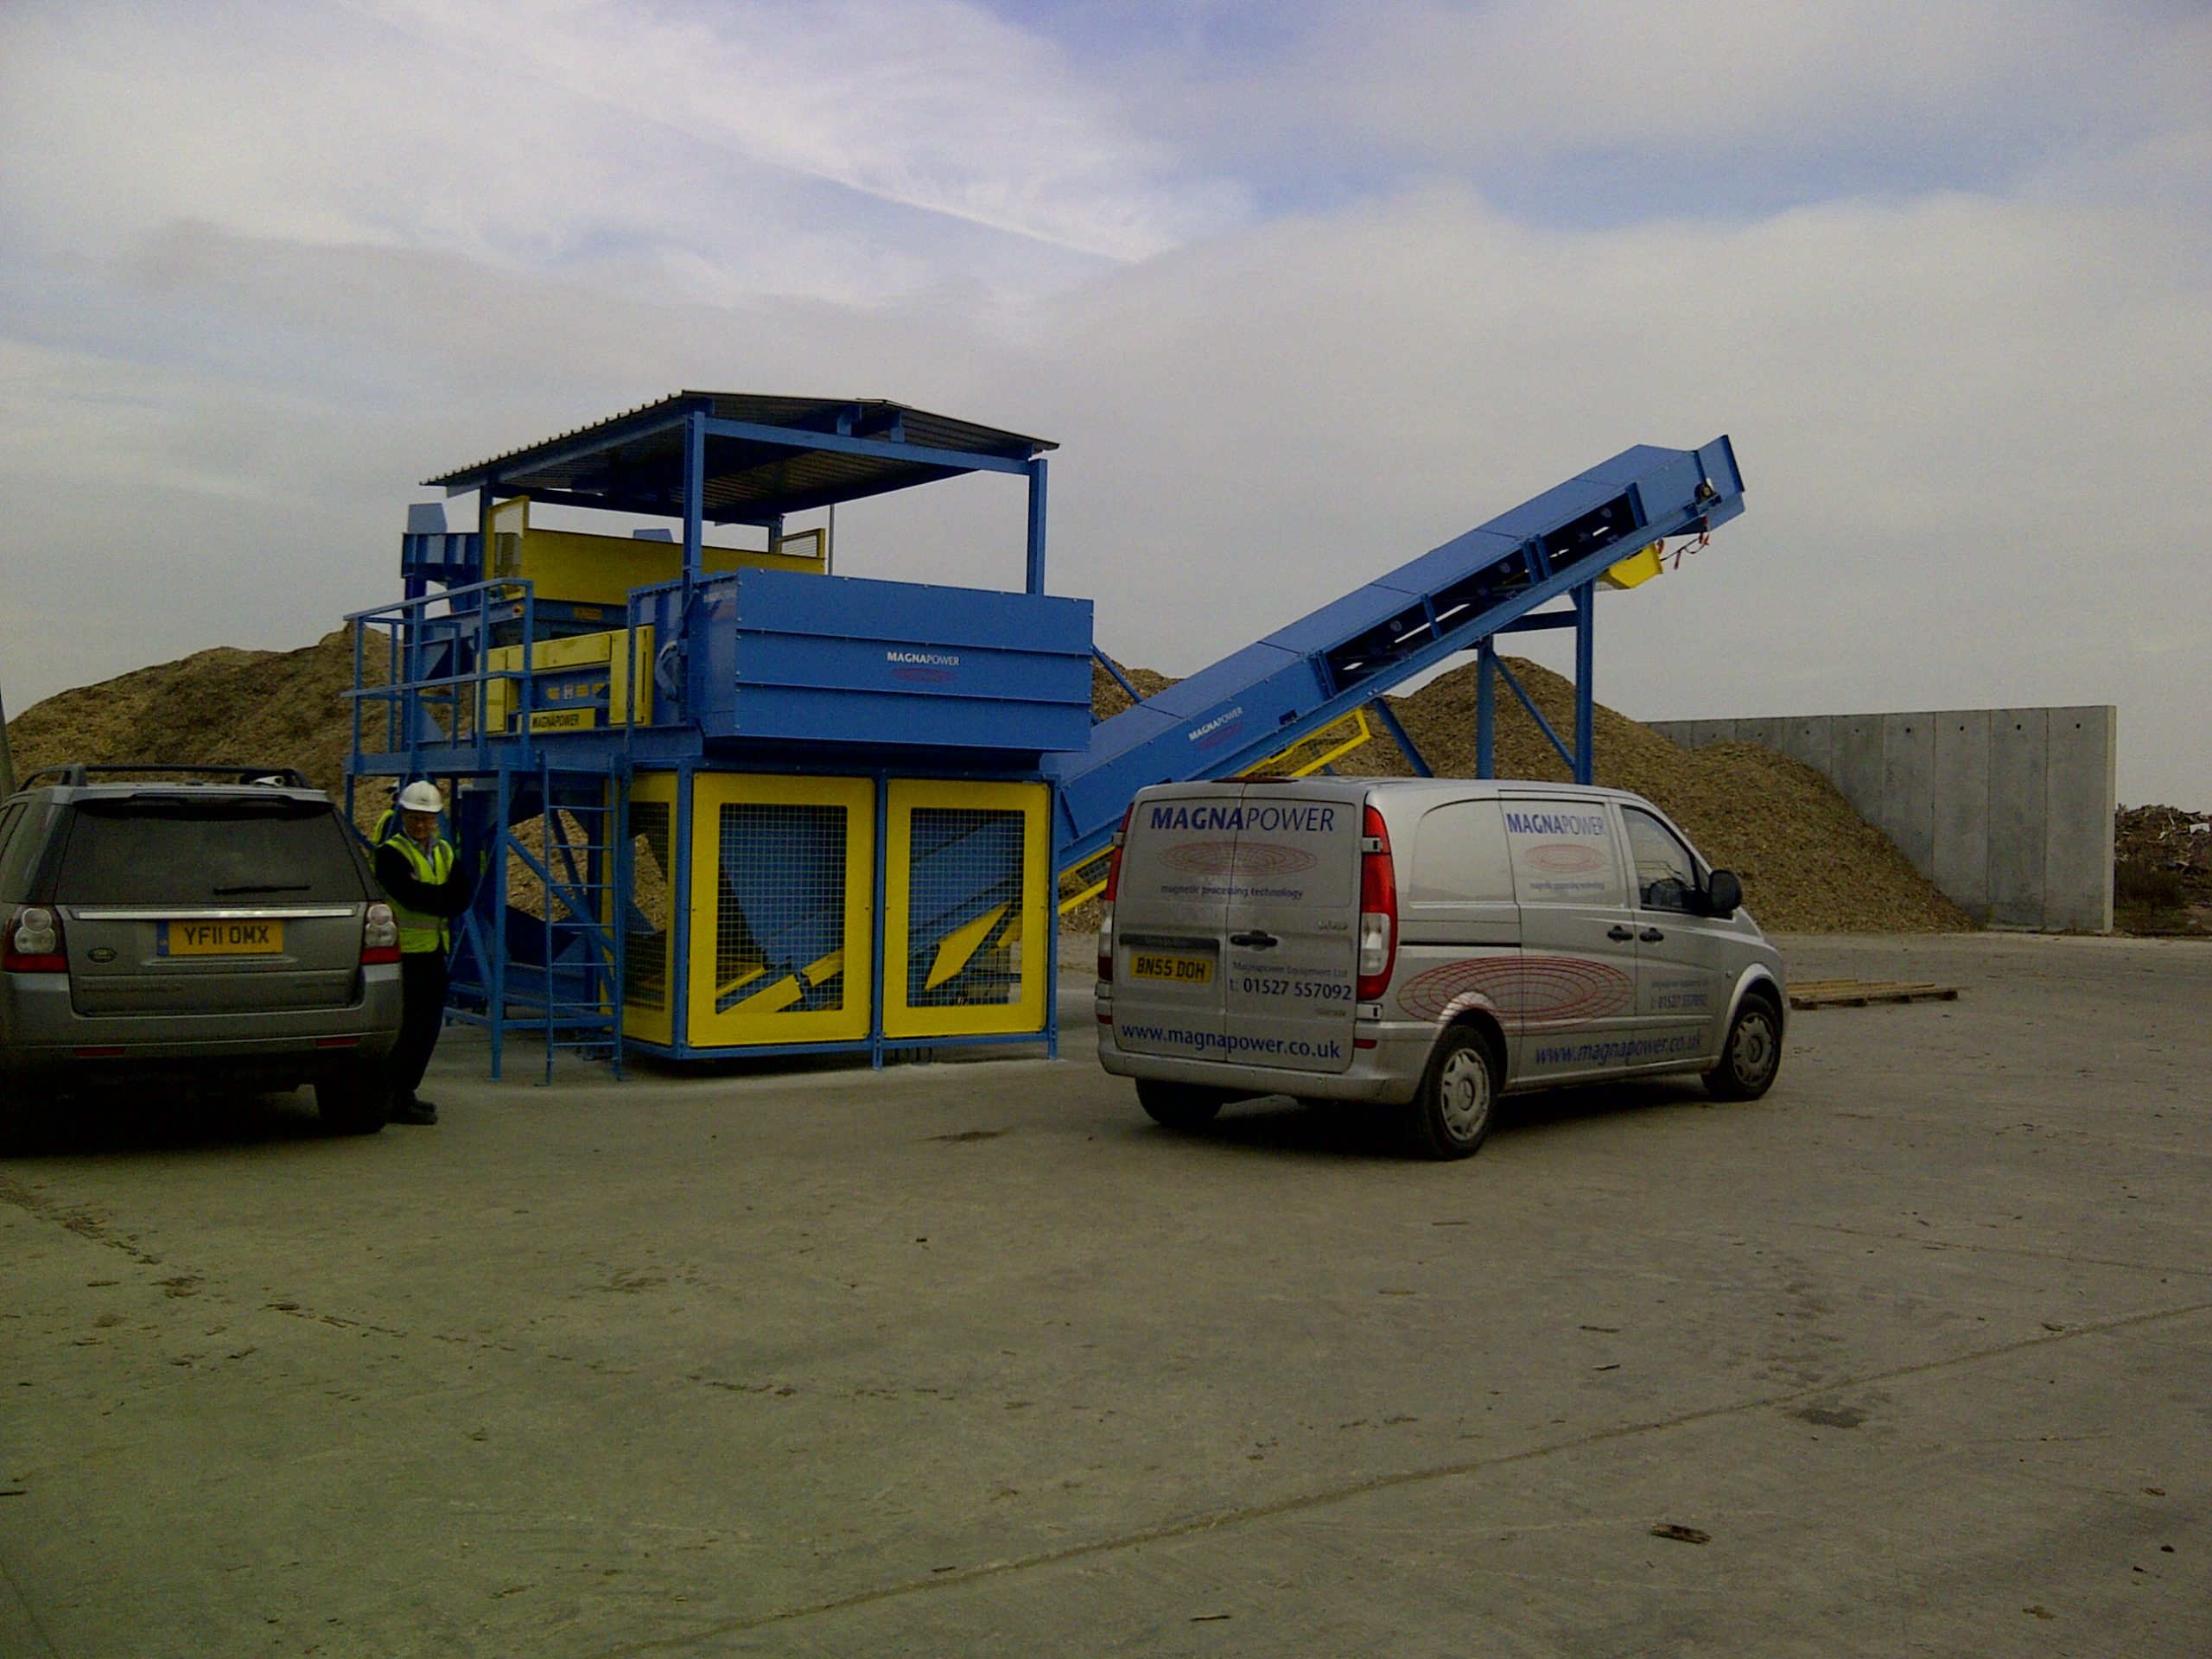 Non-ferrous separation plant installed by Magnapower